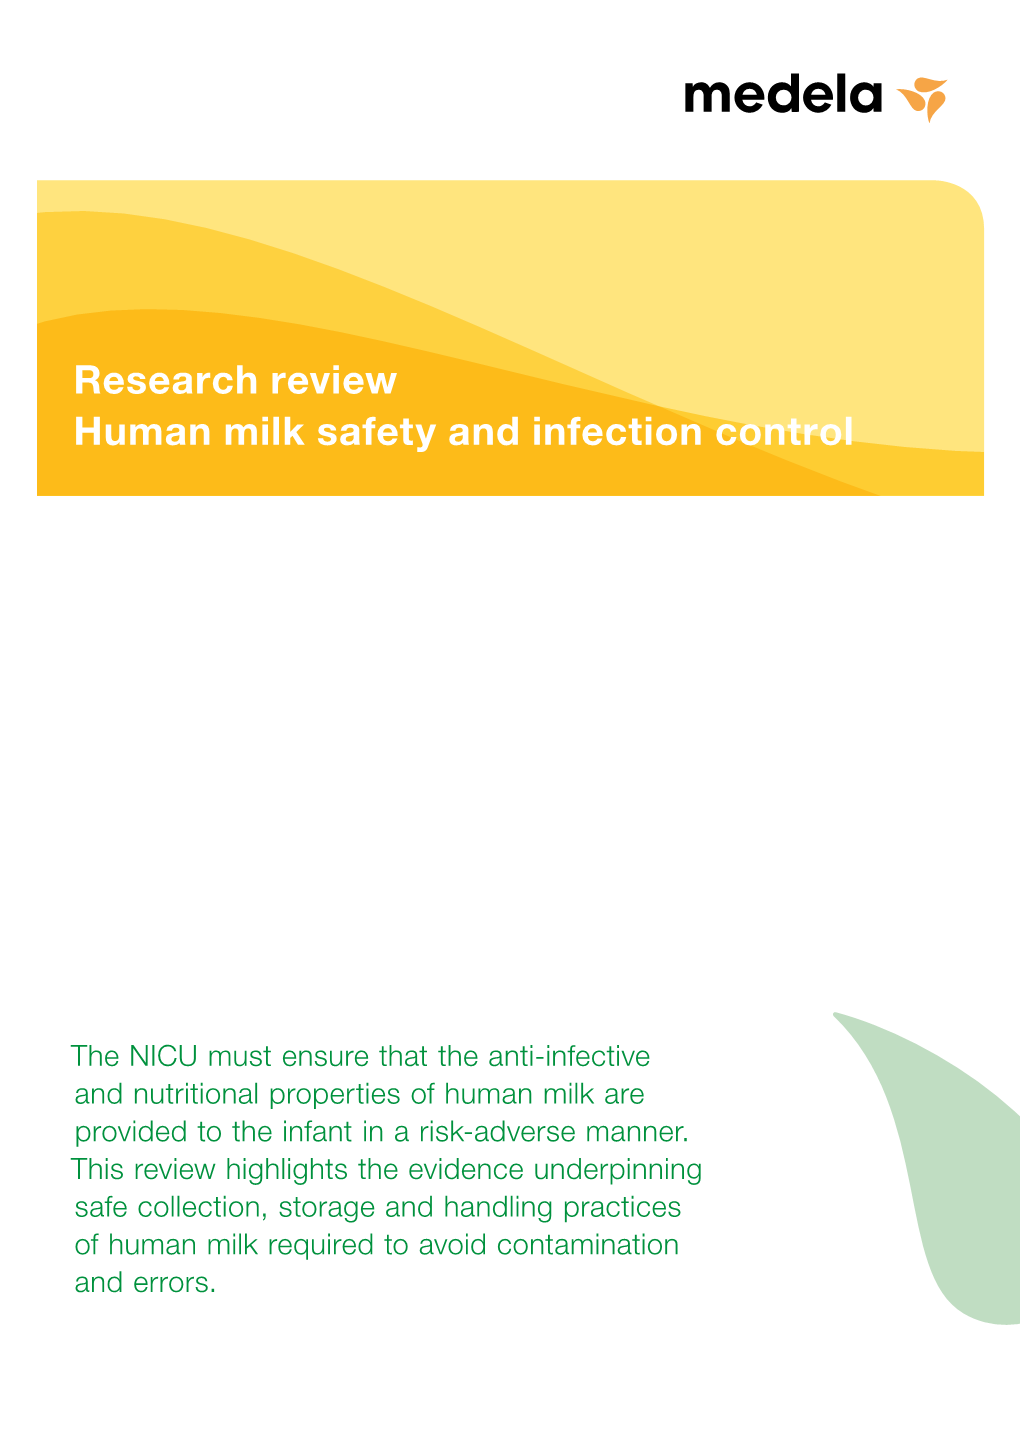 Research Review Human Milk Safety and Infection Control